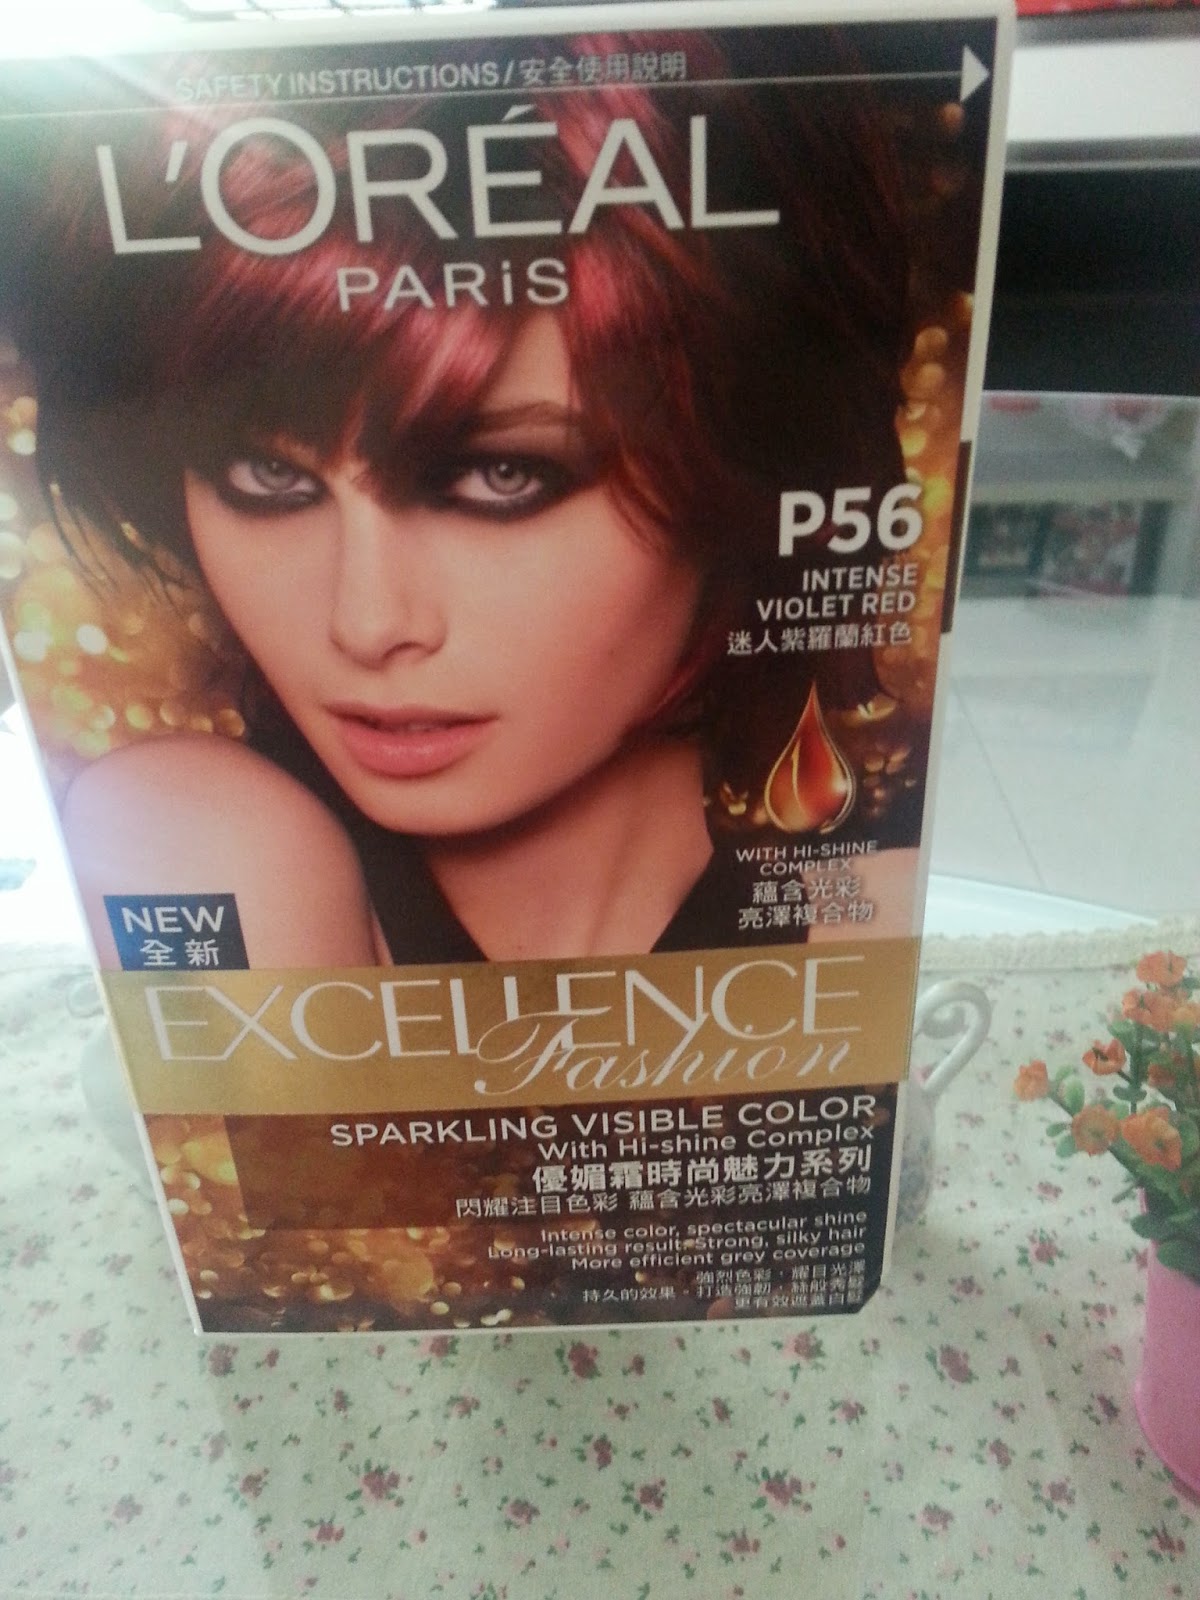 Make It Worth While Review Loreal Intense Violet Red